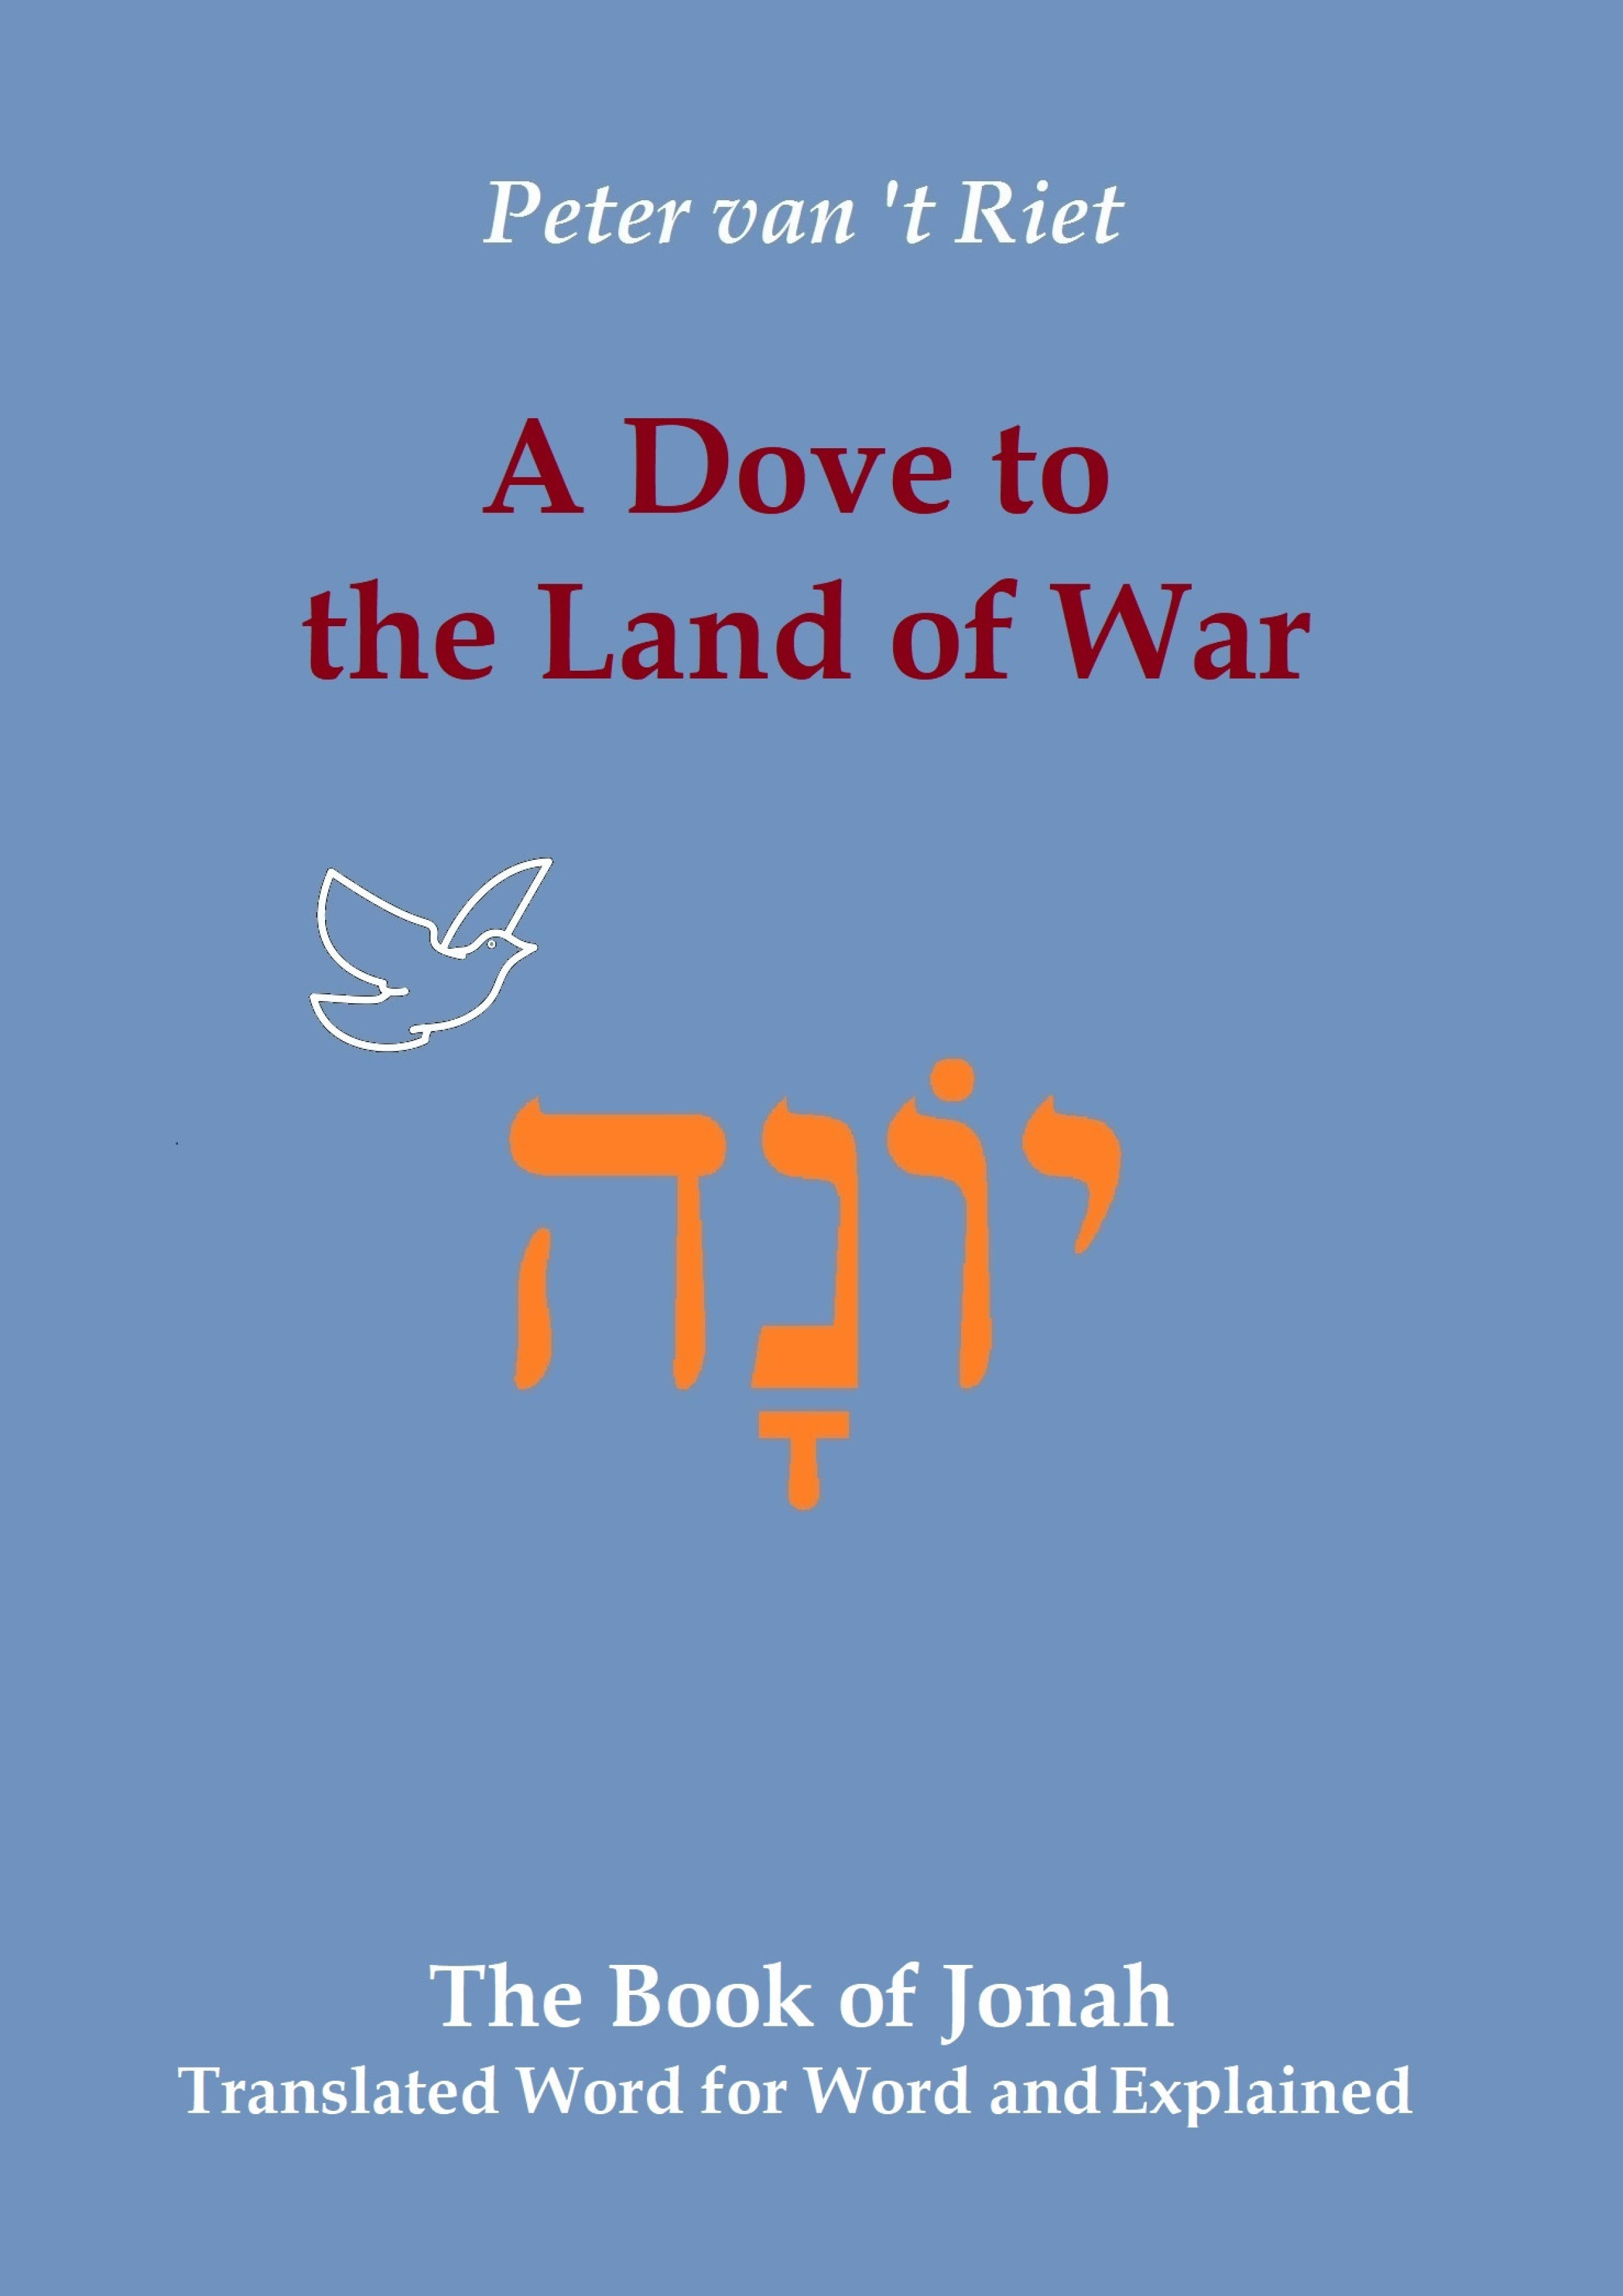 A Dove to the Land of War